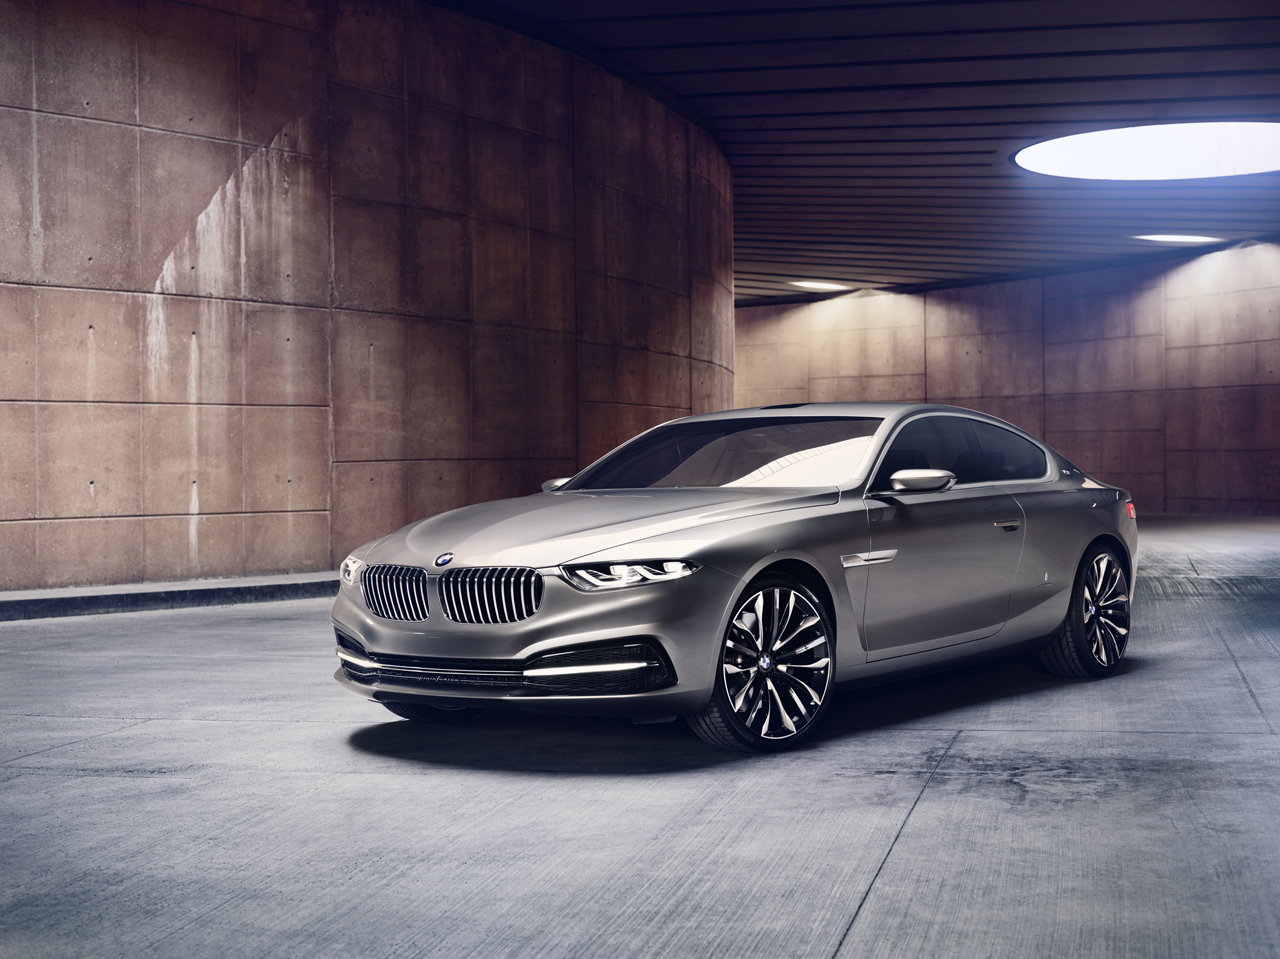 HQ BMW Pininfarina Gran Lusso Coupe Wallpapers | File 786.23Kb